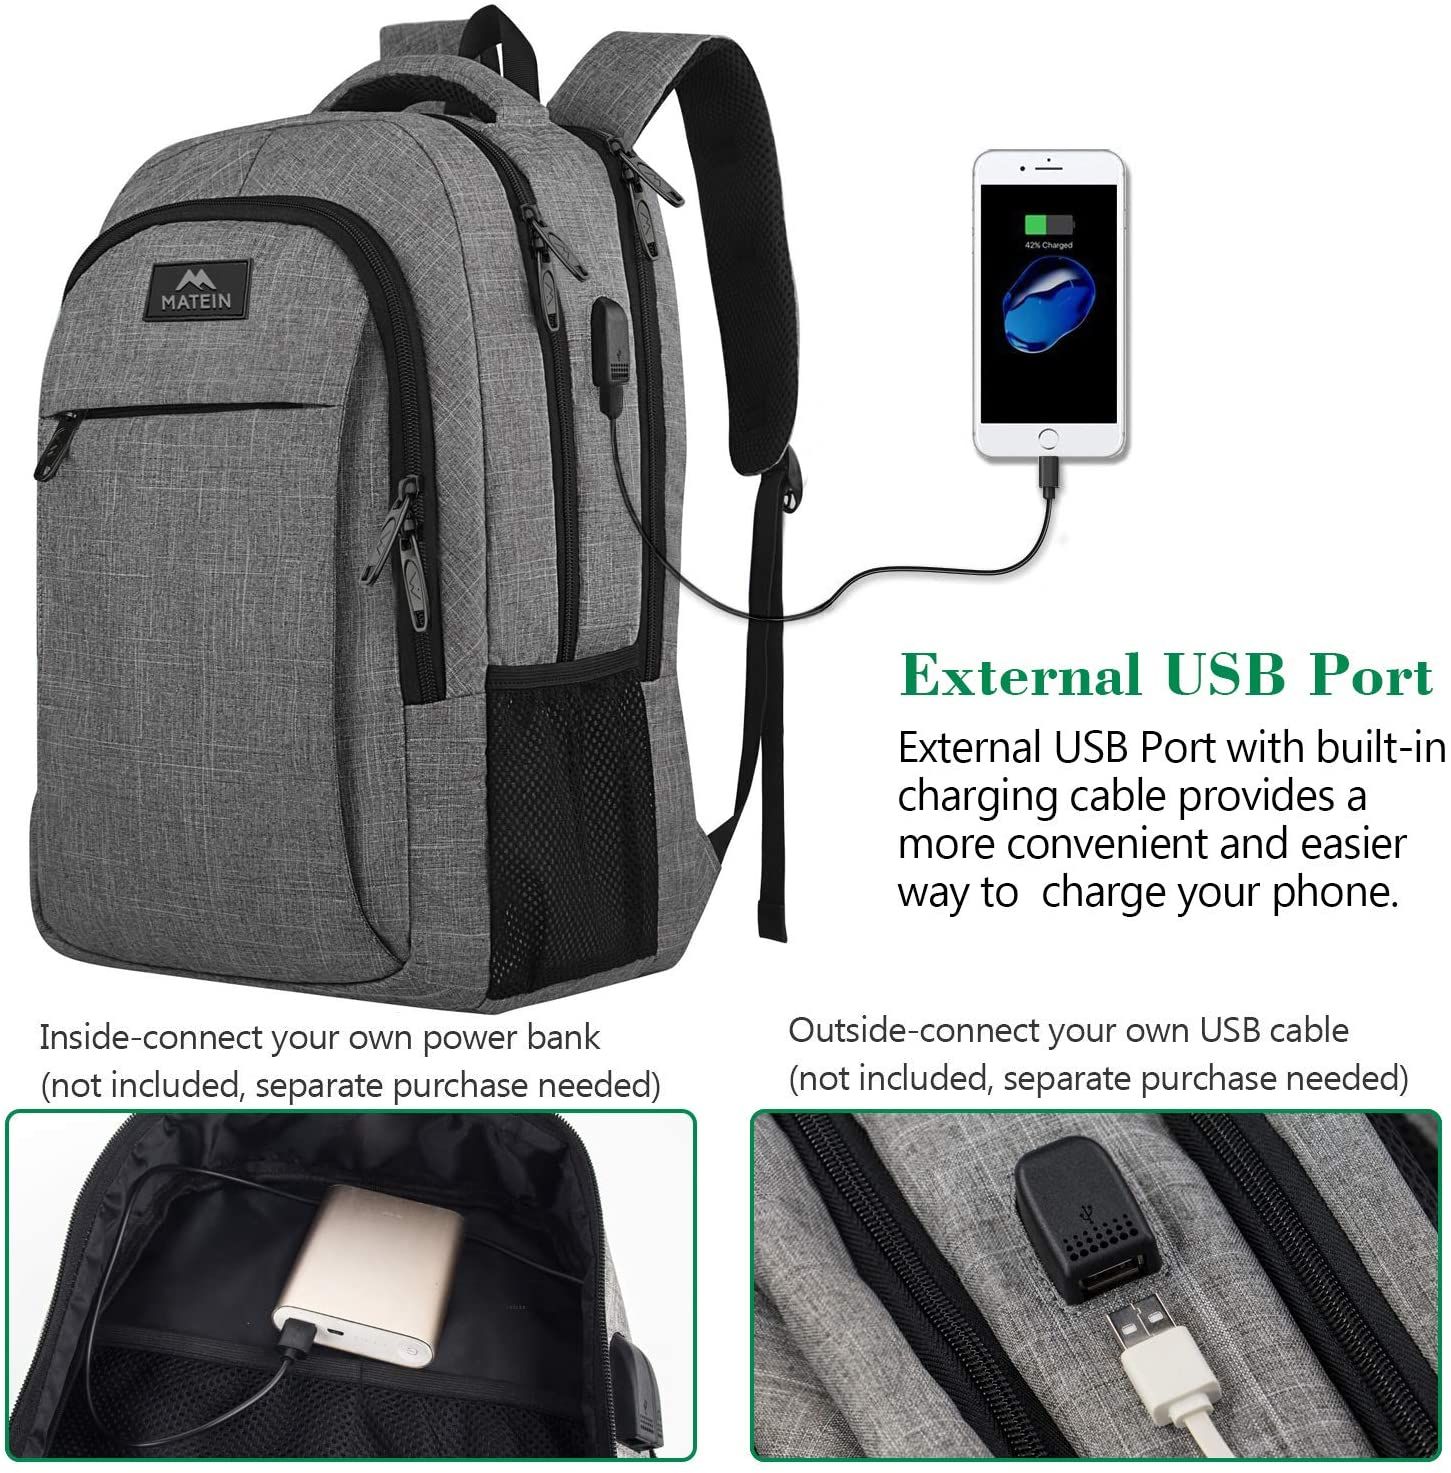 Matein Travel Laptop Backpack USB cable